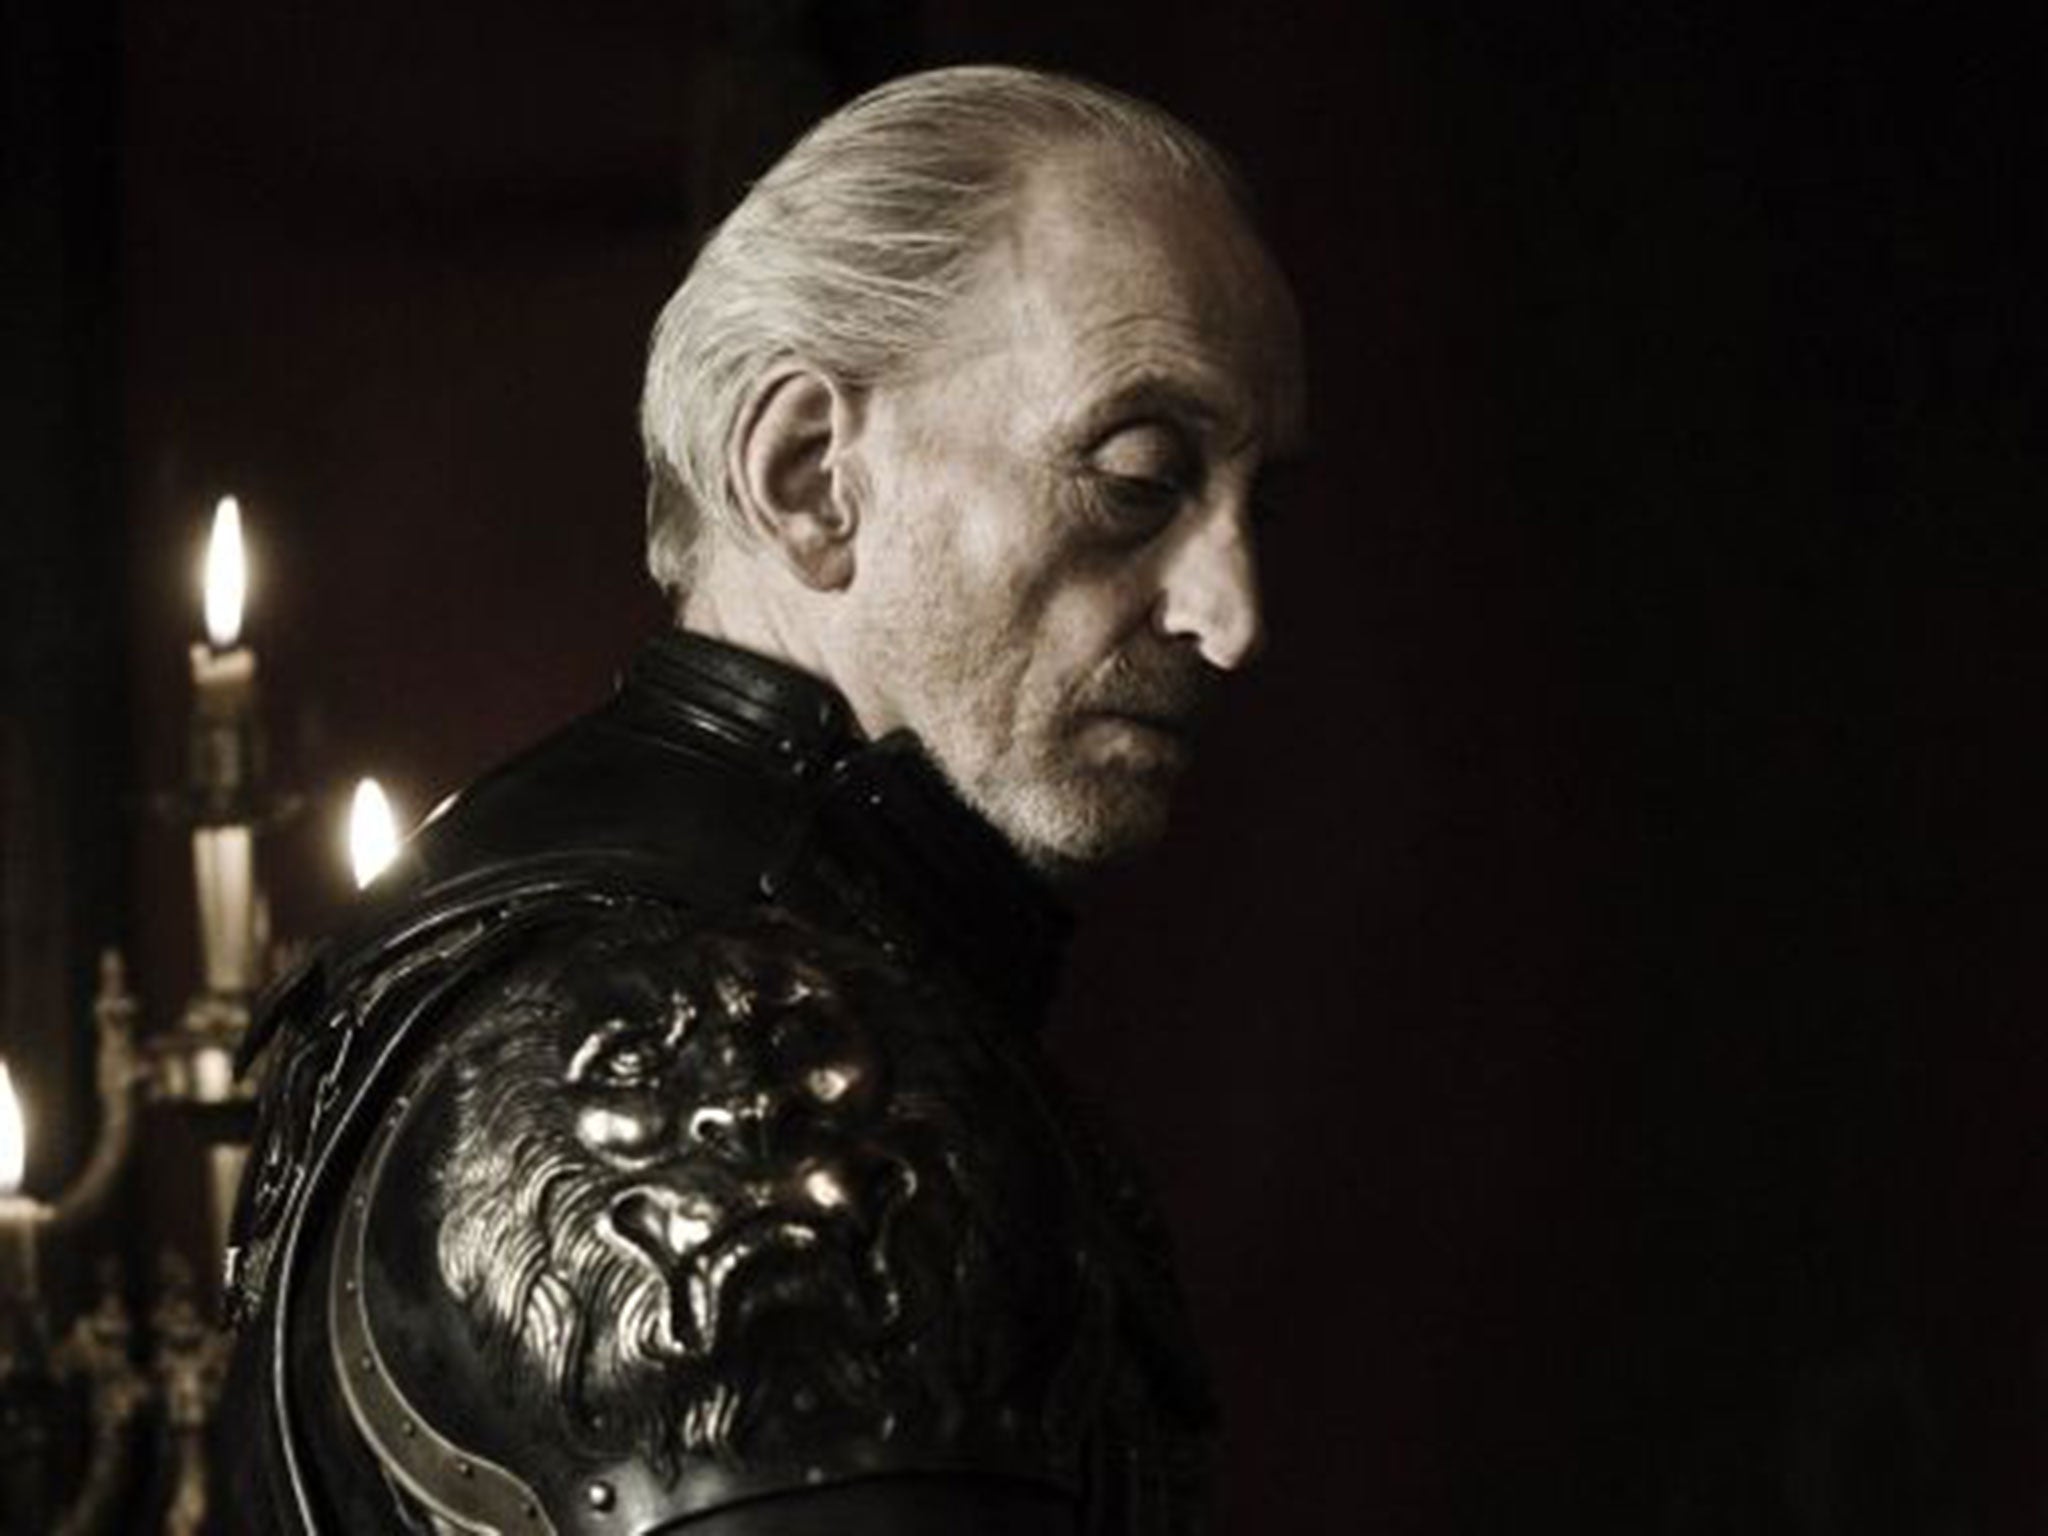 Charles Dance as Tywin Lannister, who is set to make a return